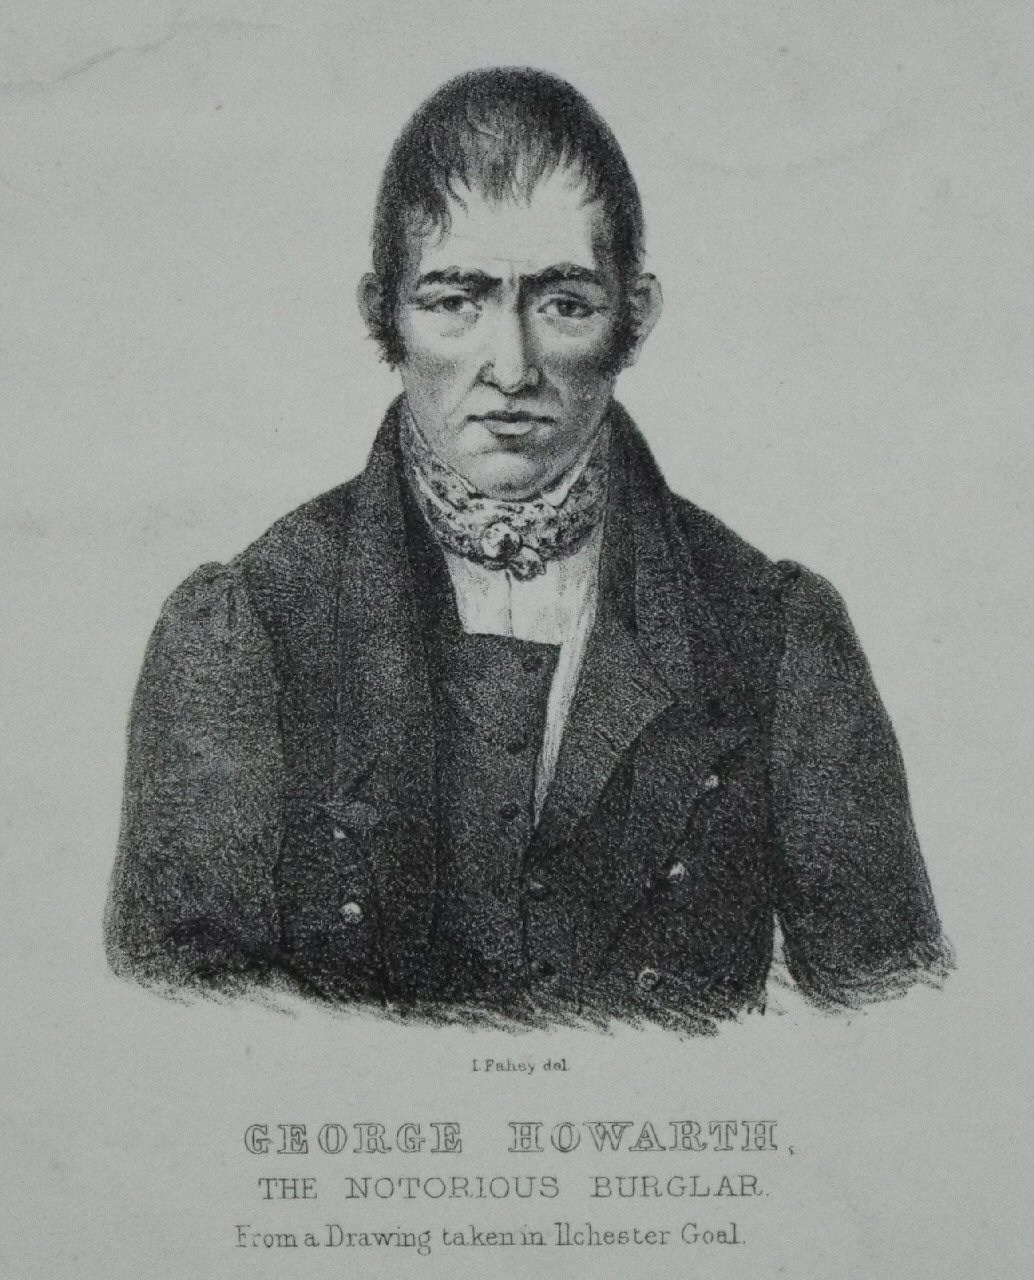 Lithograph - George Howarth, the Notorious Burglar. From a Drawing taken in Ilchester Jail.